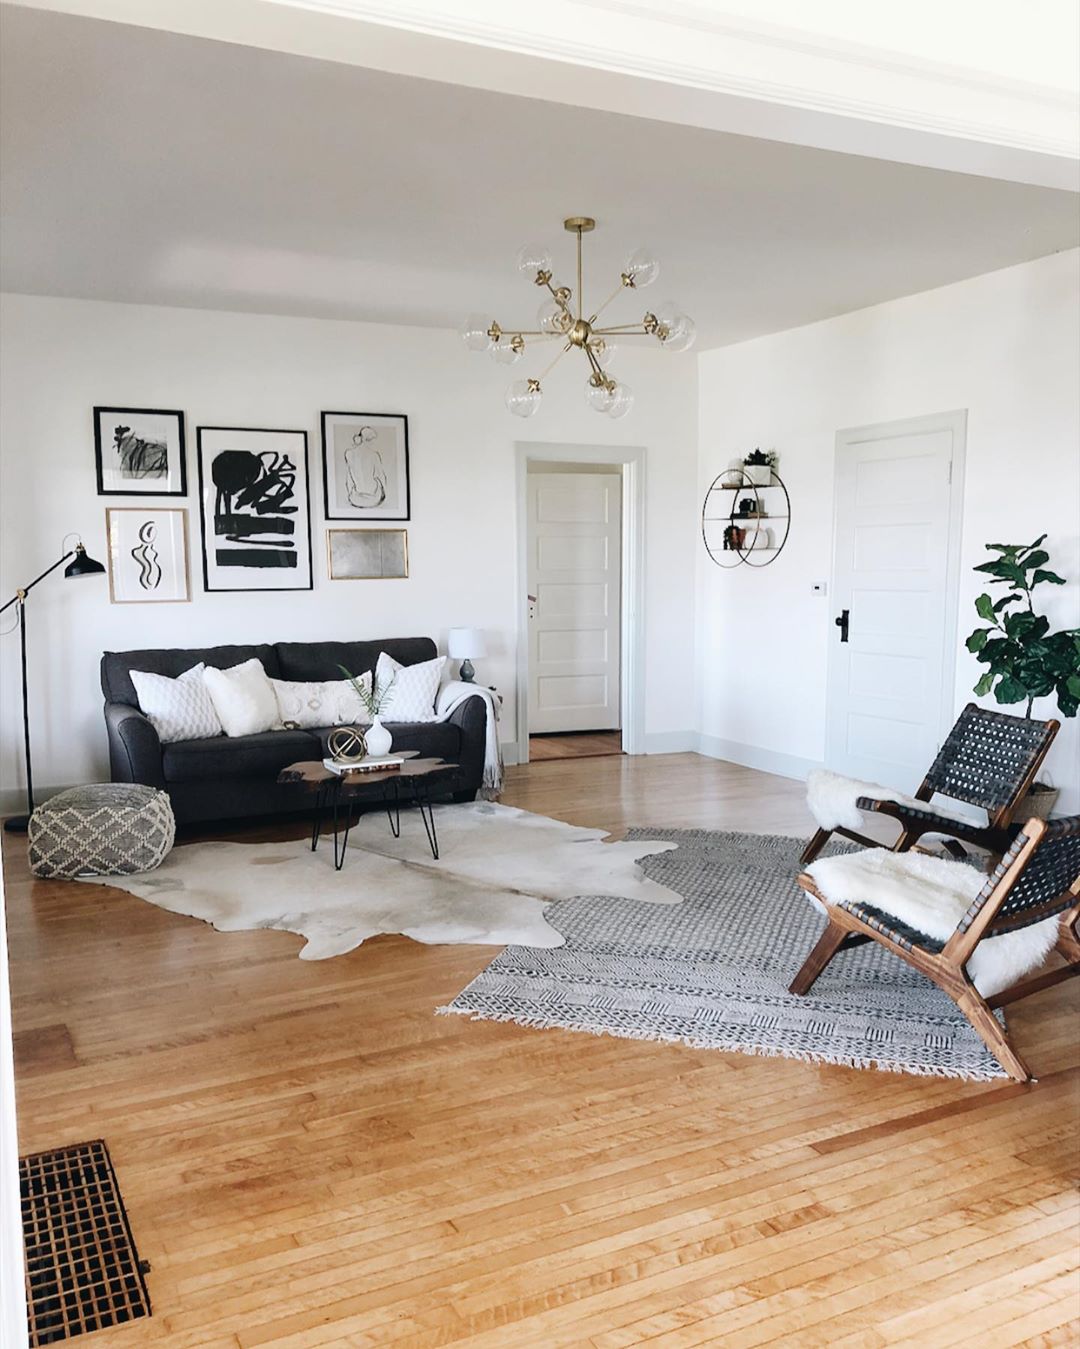 Spacious apartment room with minimalist design. Photo by Instagram user @sarahshireed